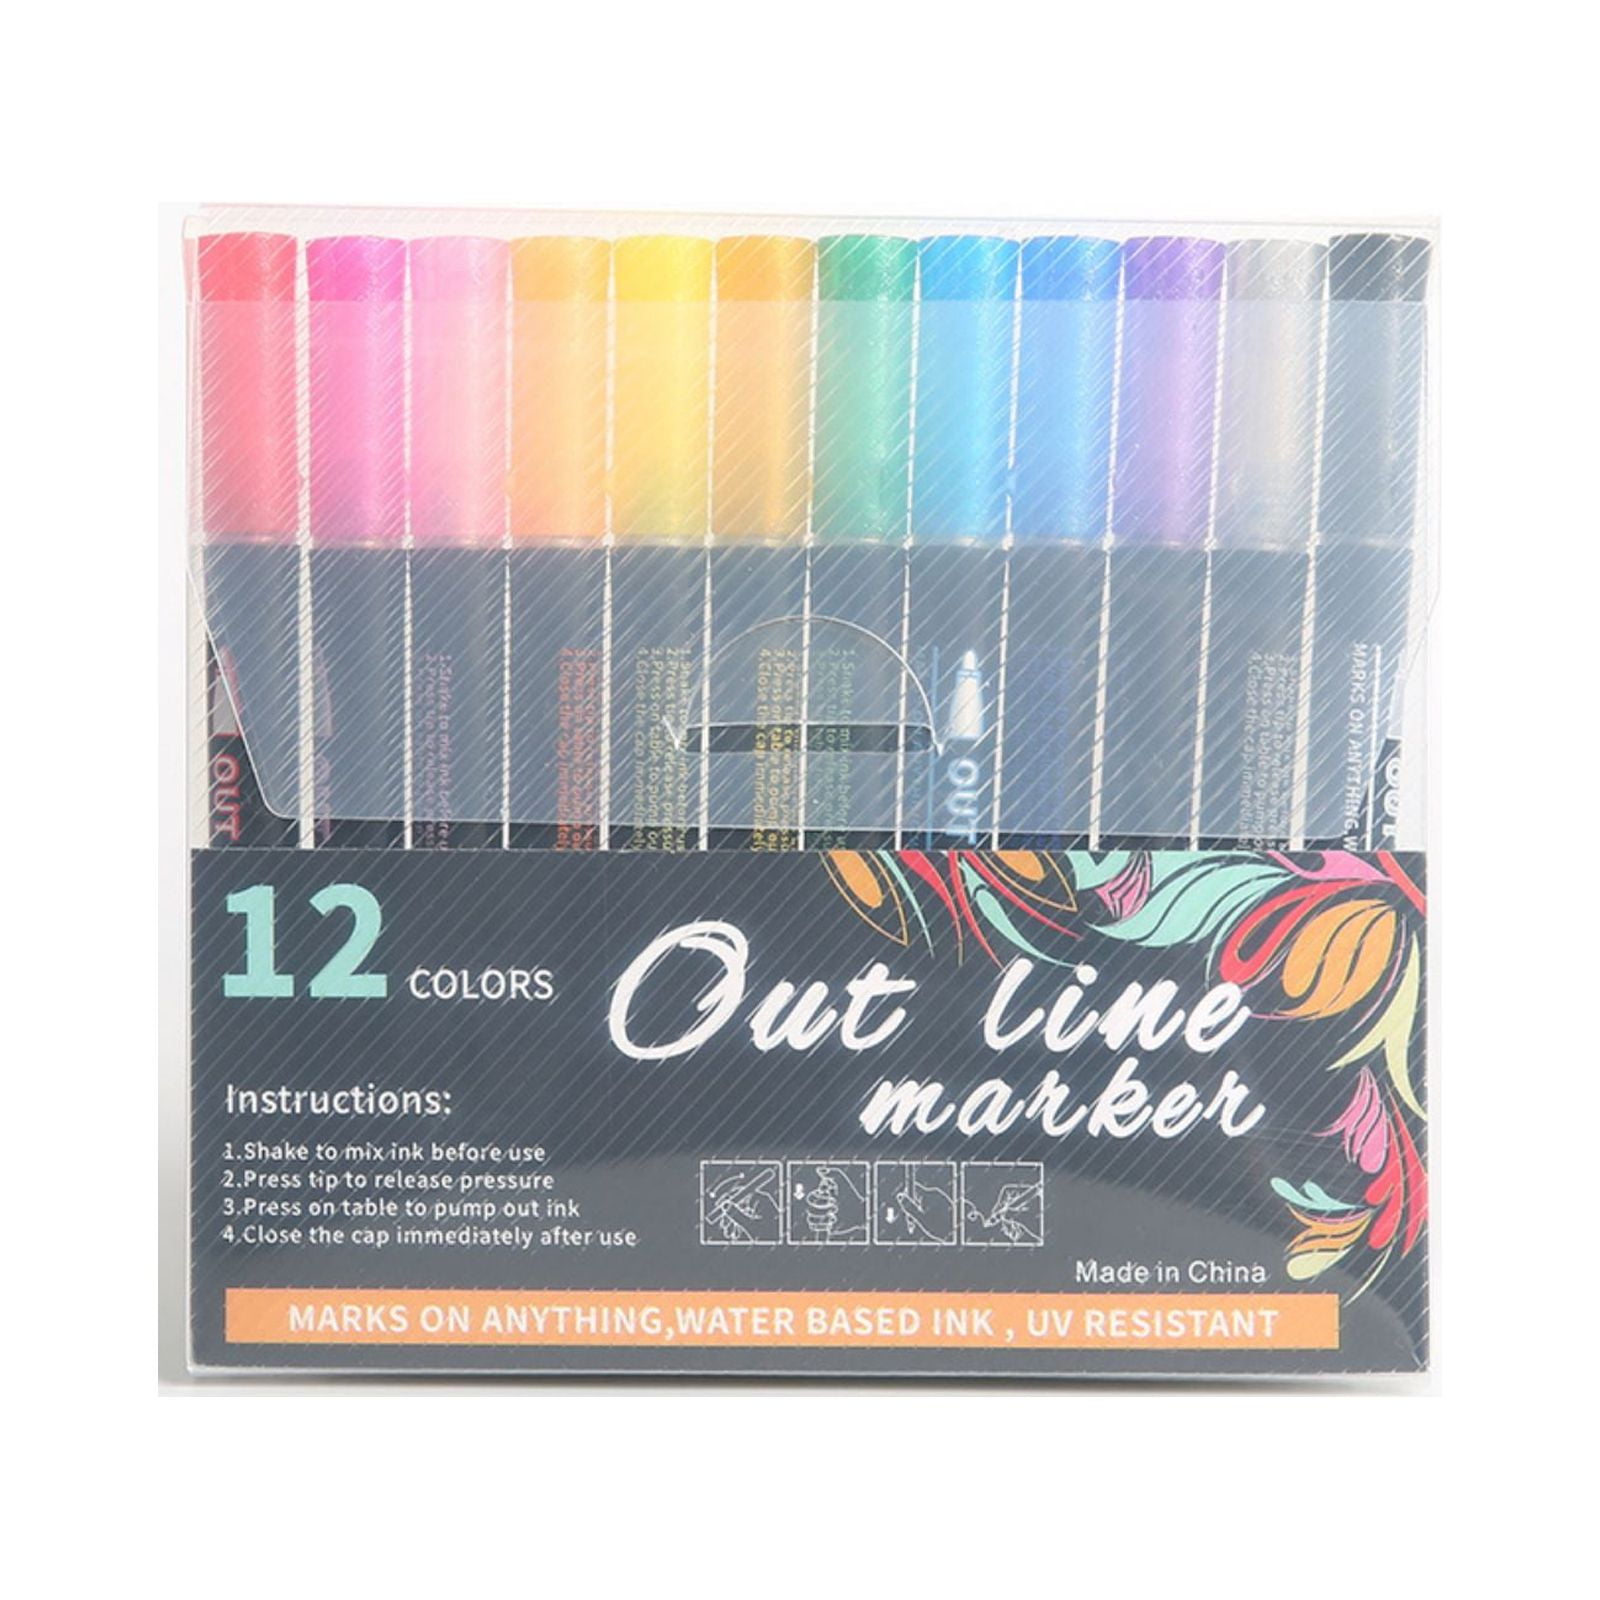  TOOLI-ART Acrylic Paint Markers Paint Pens Special Colors Set  For Rock Painting, Canvas, Fabric, Glass, Mugs, Wood, Ceramics, Plastic,  Multi-Surface. Non Toxic, Water-based (PASTEL M) : Arts, Crafts & Sewing